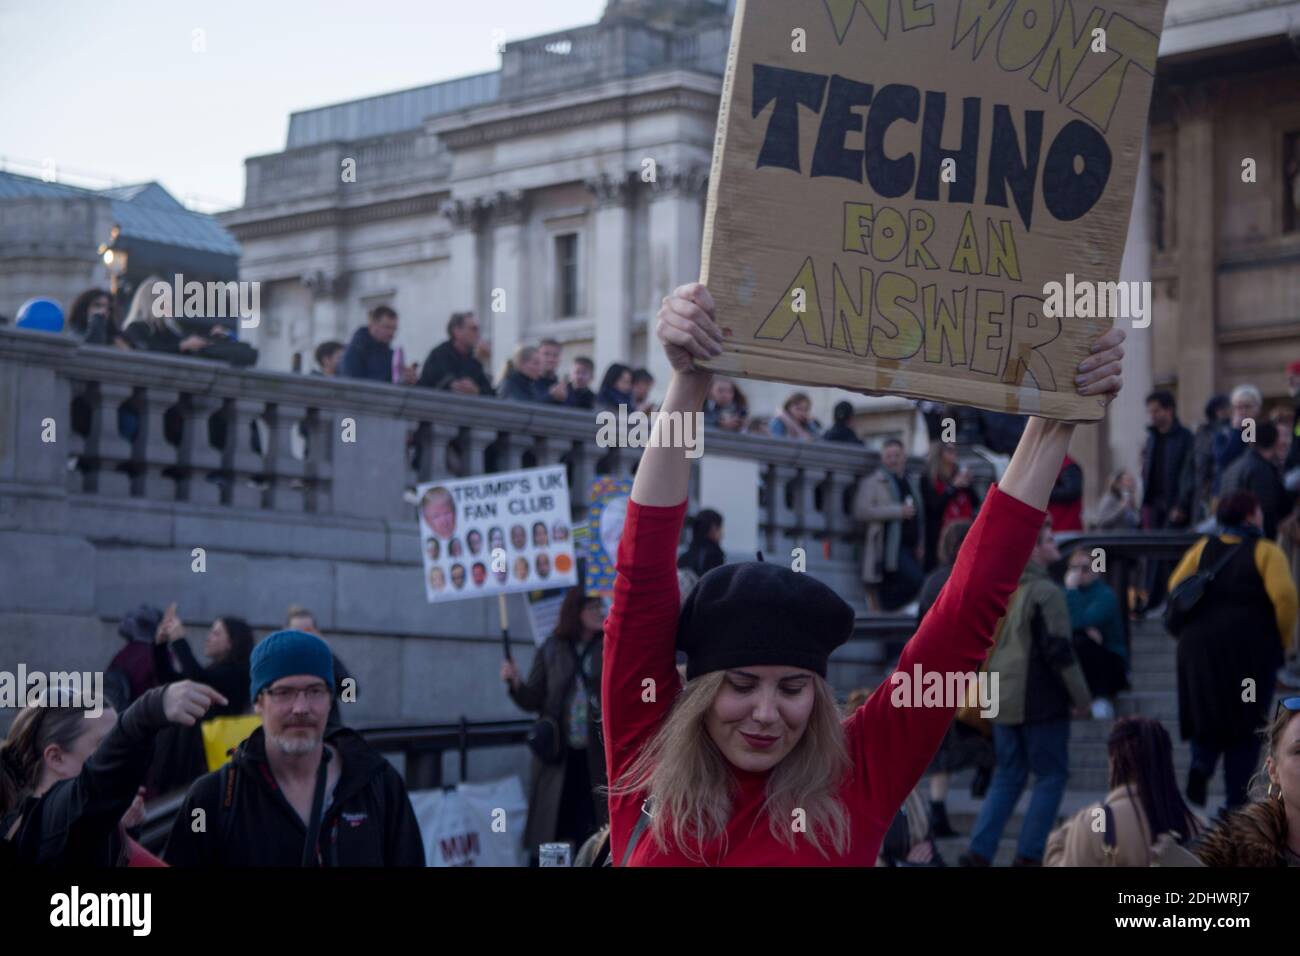 Anti Brexit female protestor holding a hand written placard saying “We wont Techno for an answer” Stock Photo